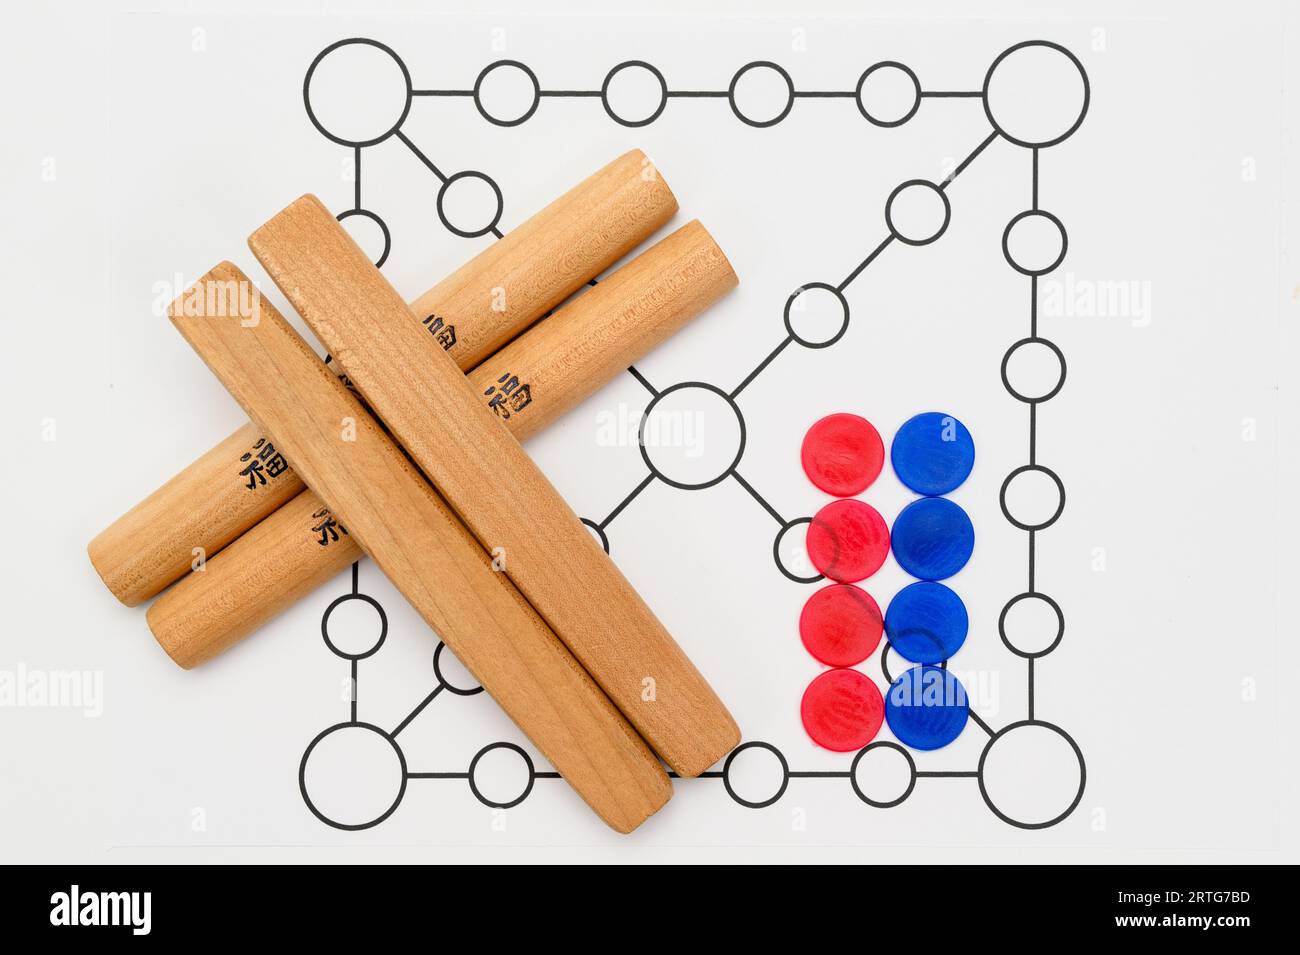 Yut is a traditional Korean board game that uses four wooden sticks called yut. Translation of Text : Good luck. Stock Photo